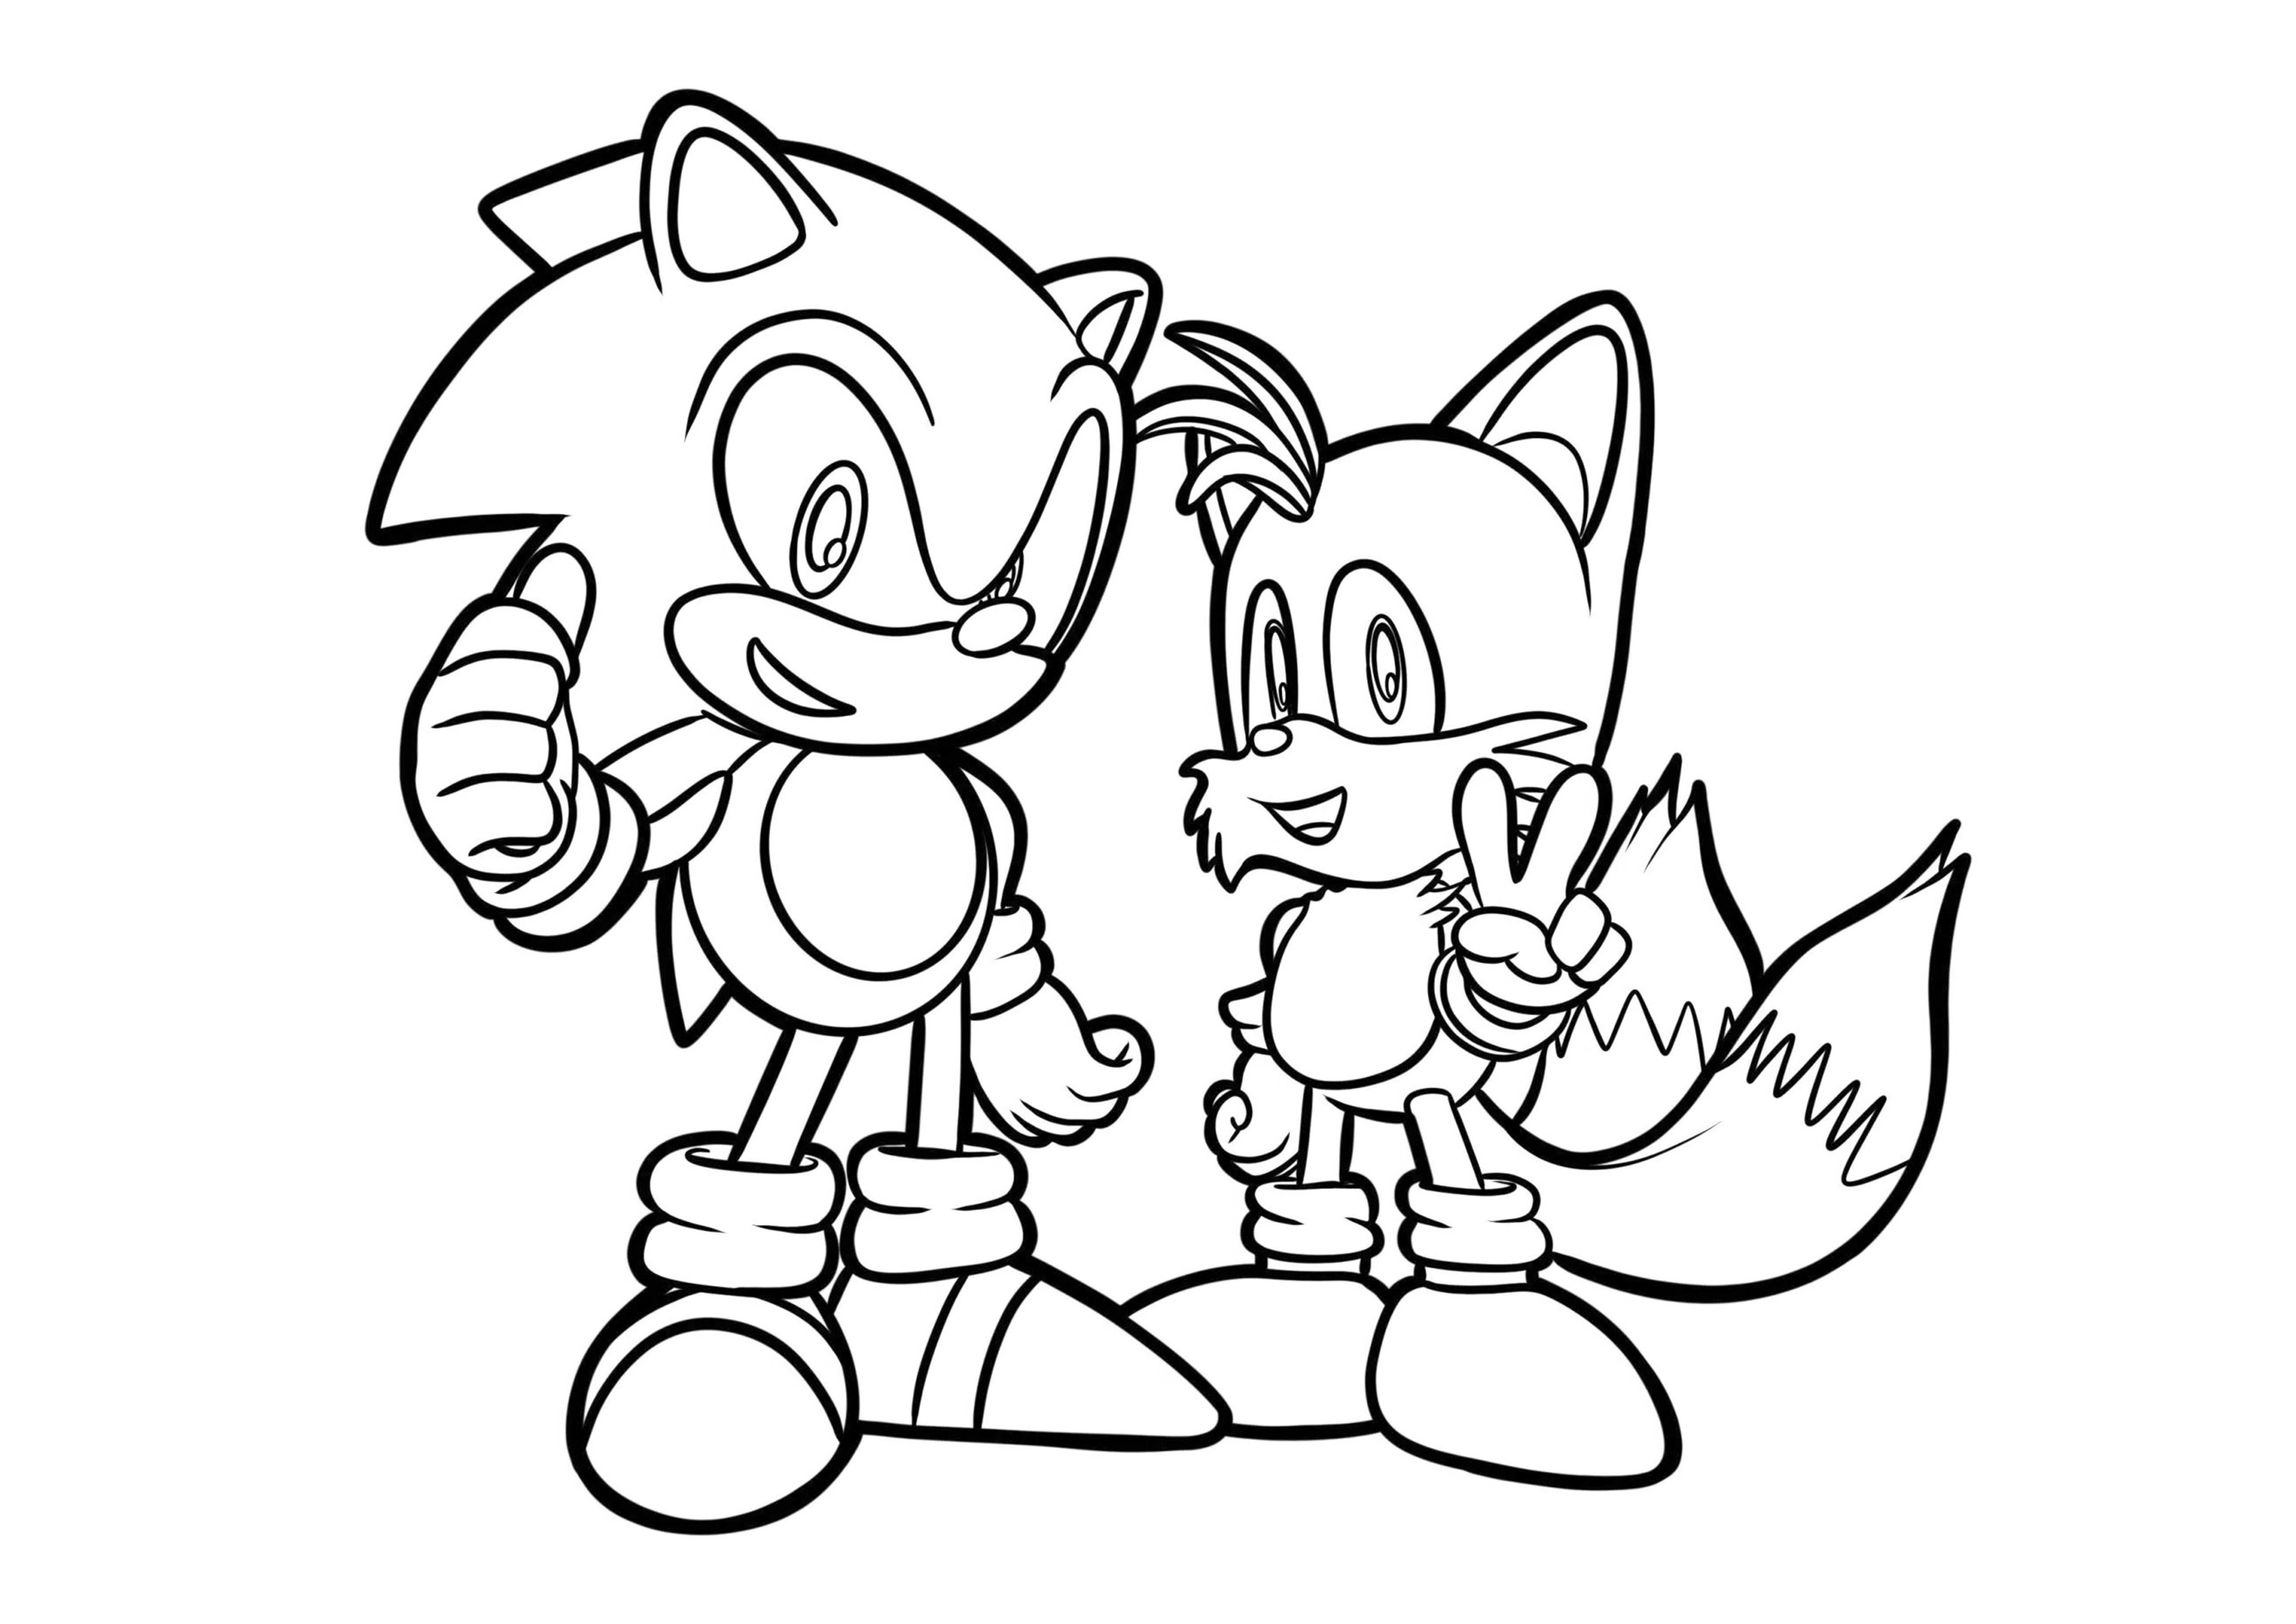 Sonic y Tails